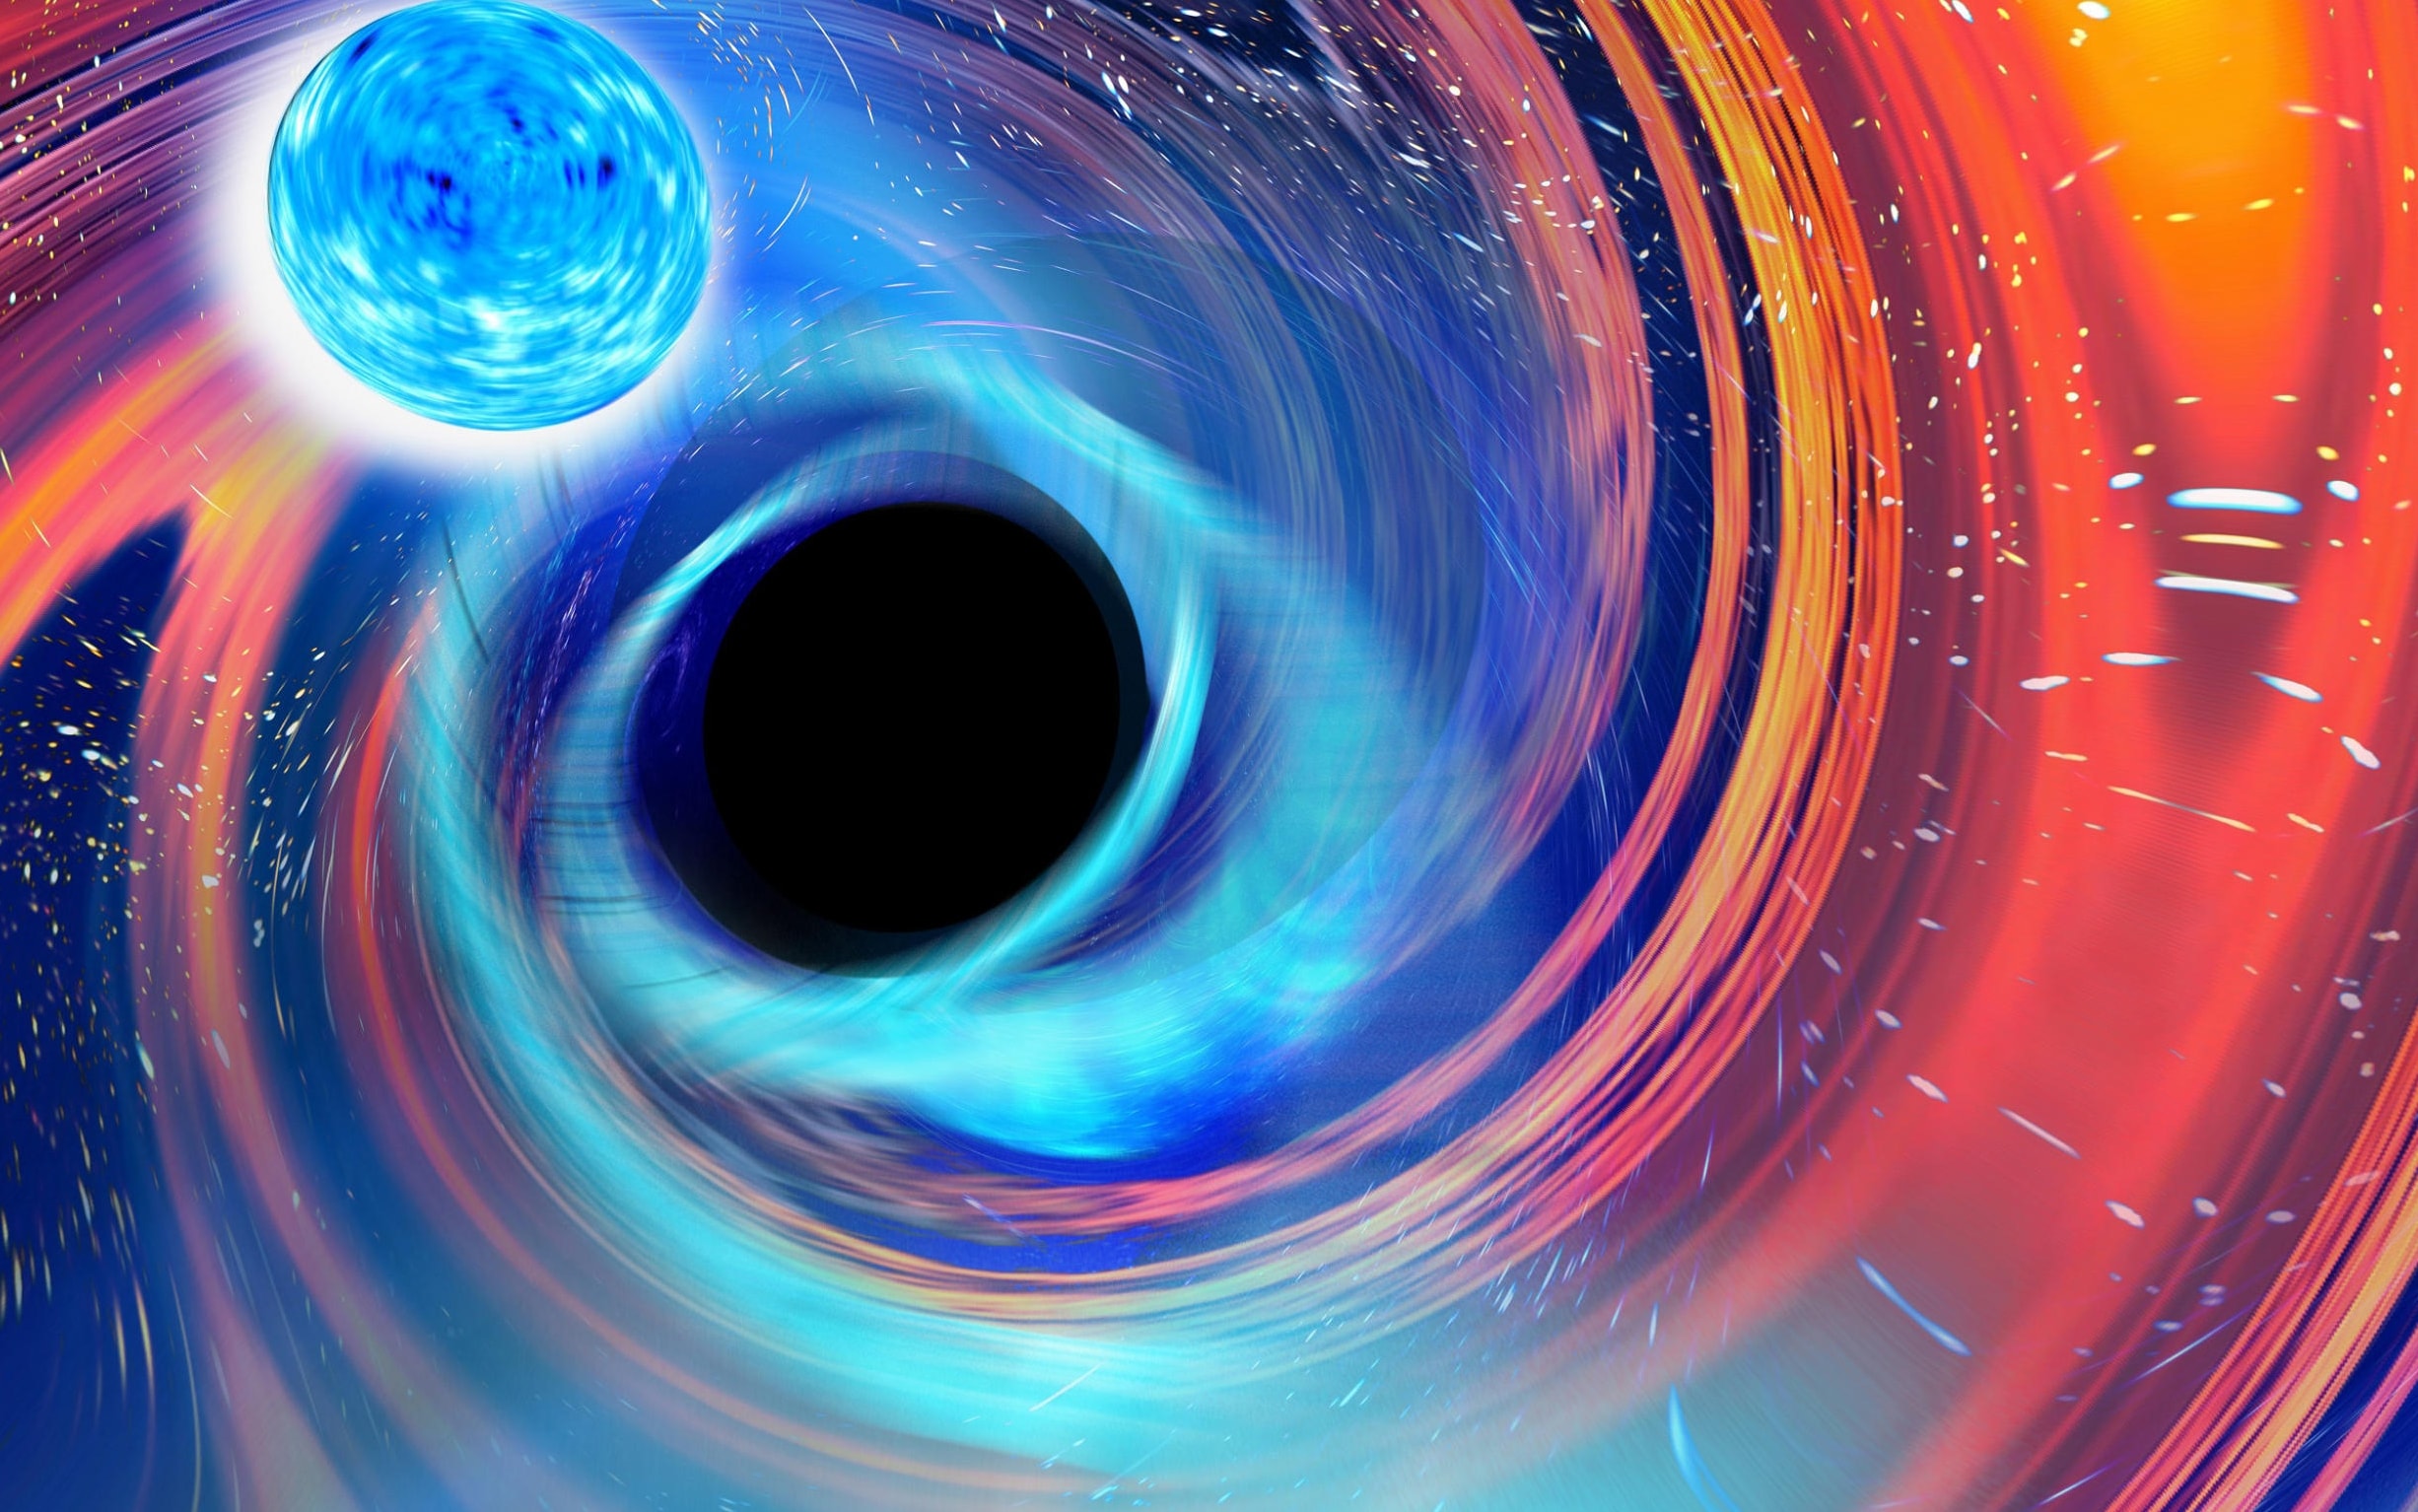 Signs of gravitational waves from black holes merged with neutron stars are recorded